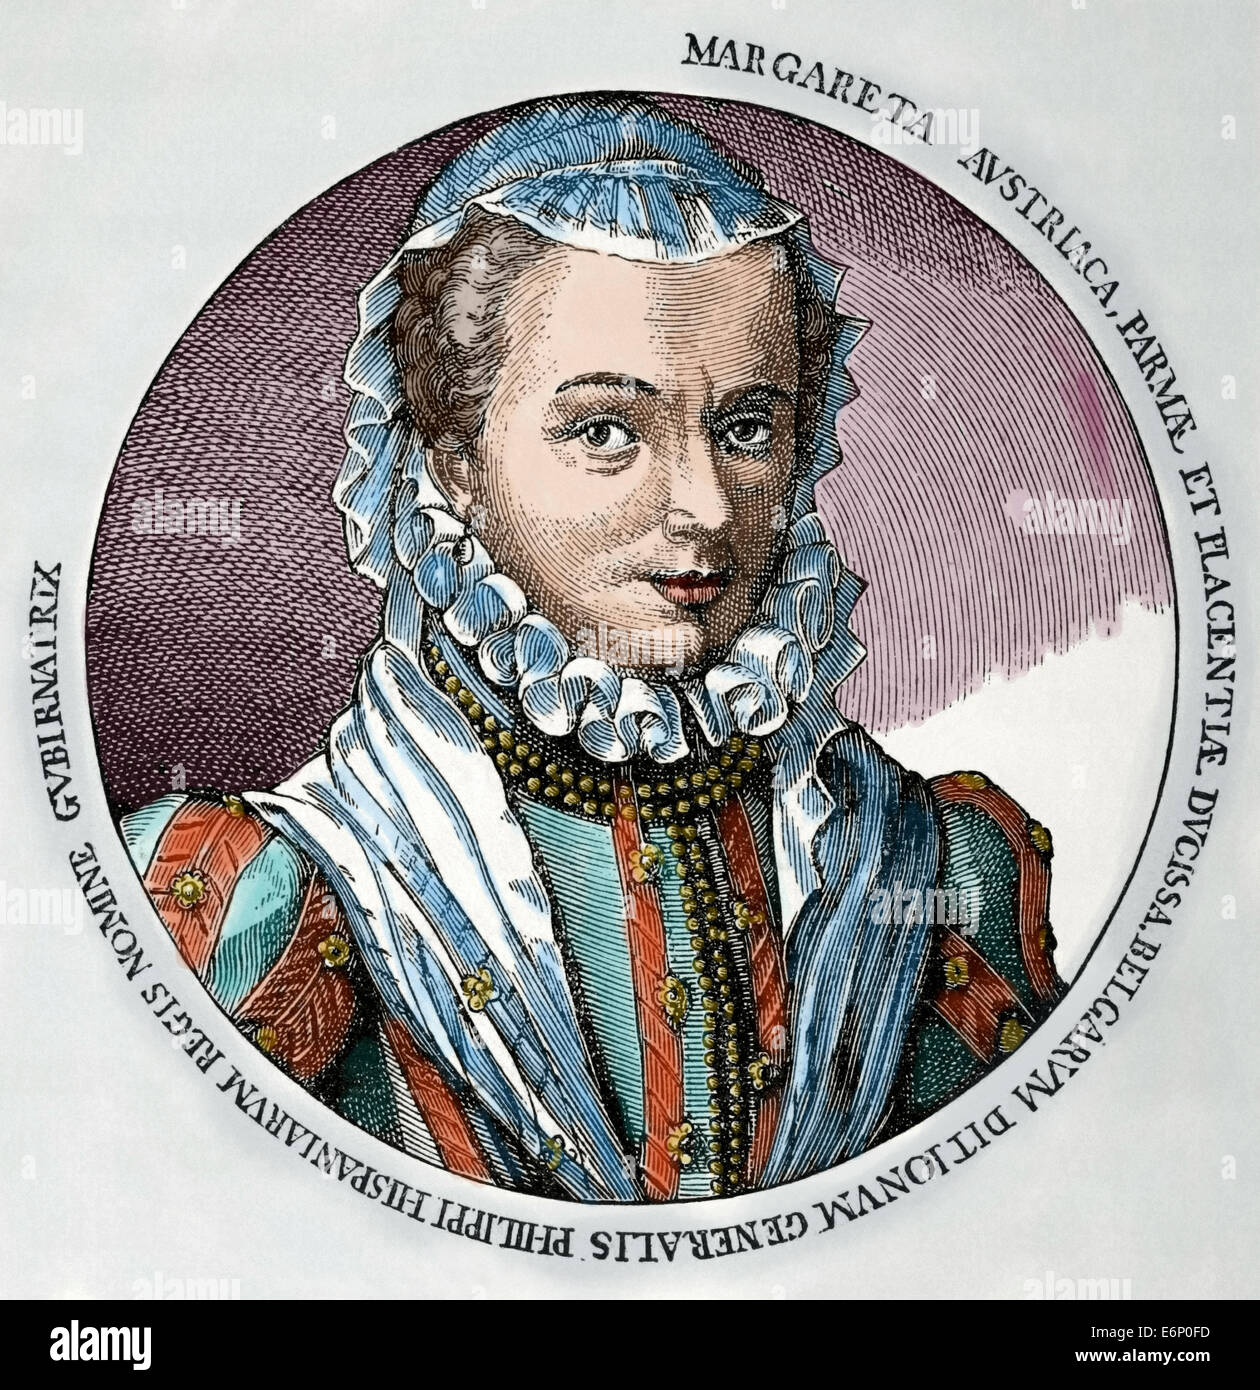 Margaret of Parma (1522-1586). Governor of the Netherlands (1559-1567) and( 1578-1582). Portrait. Engraving. Colored. Stock Photo